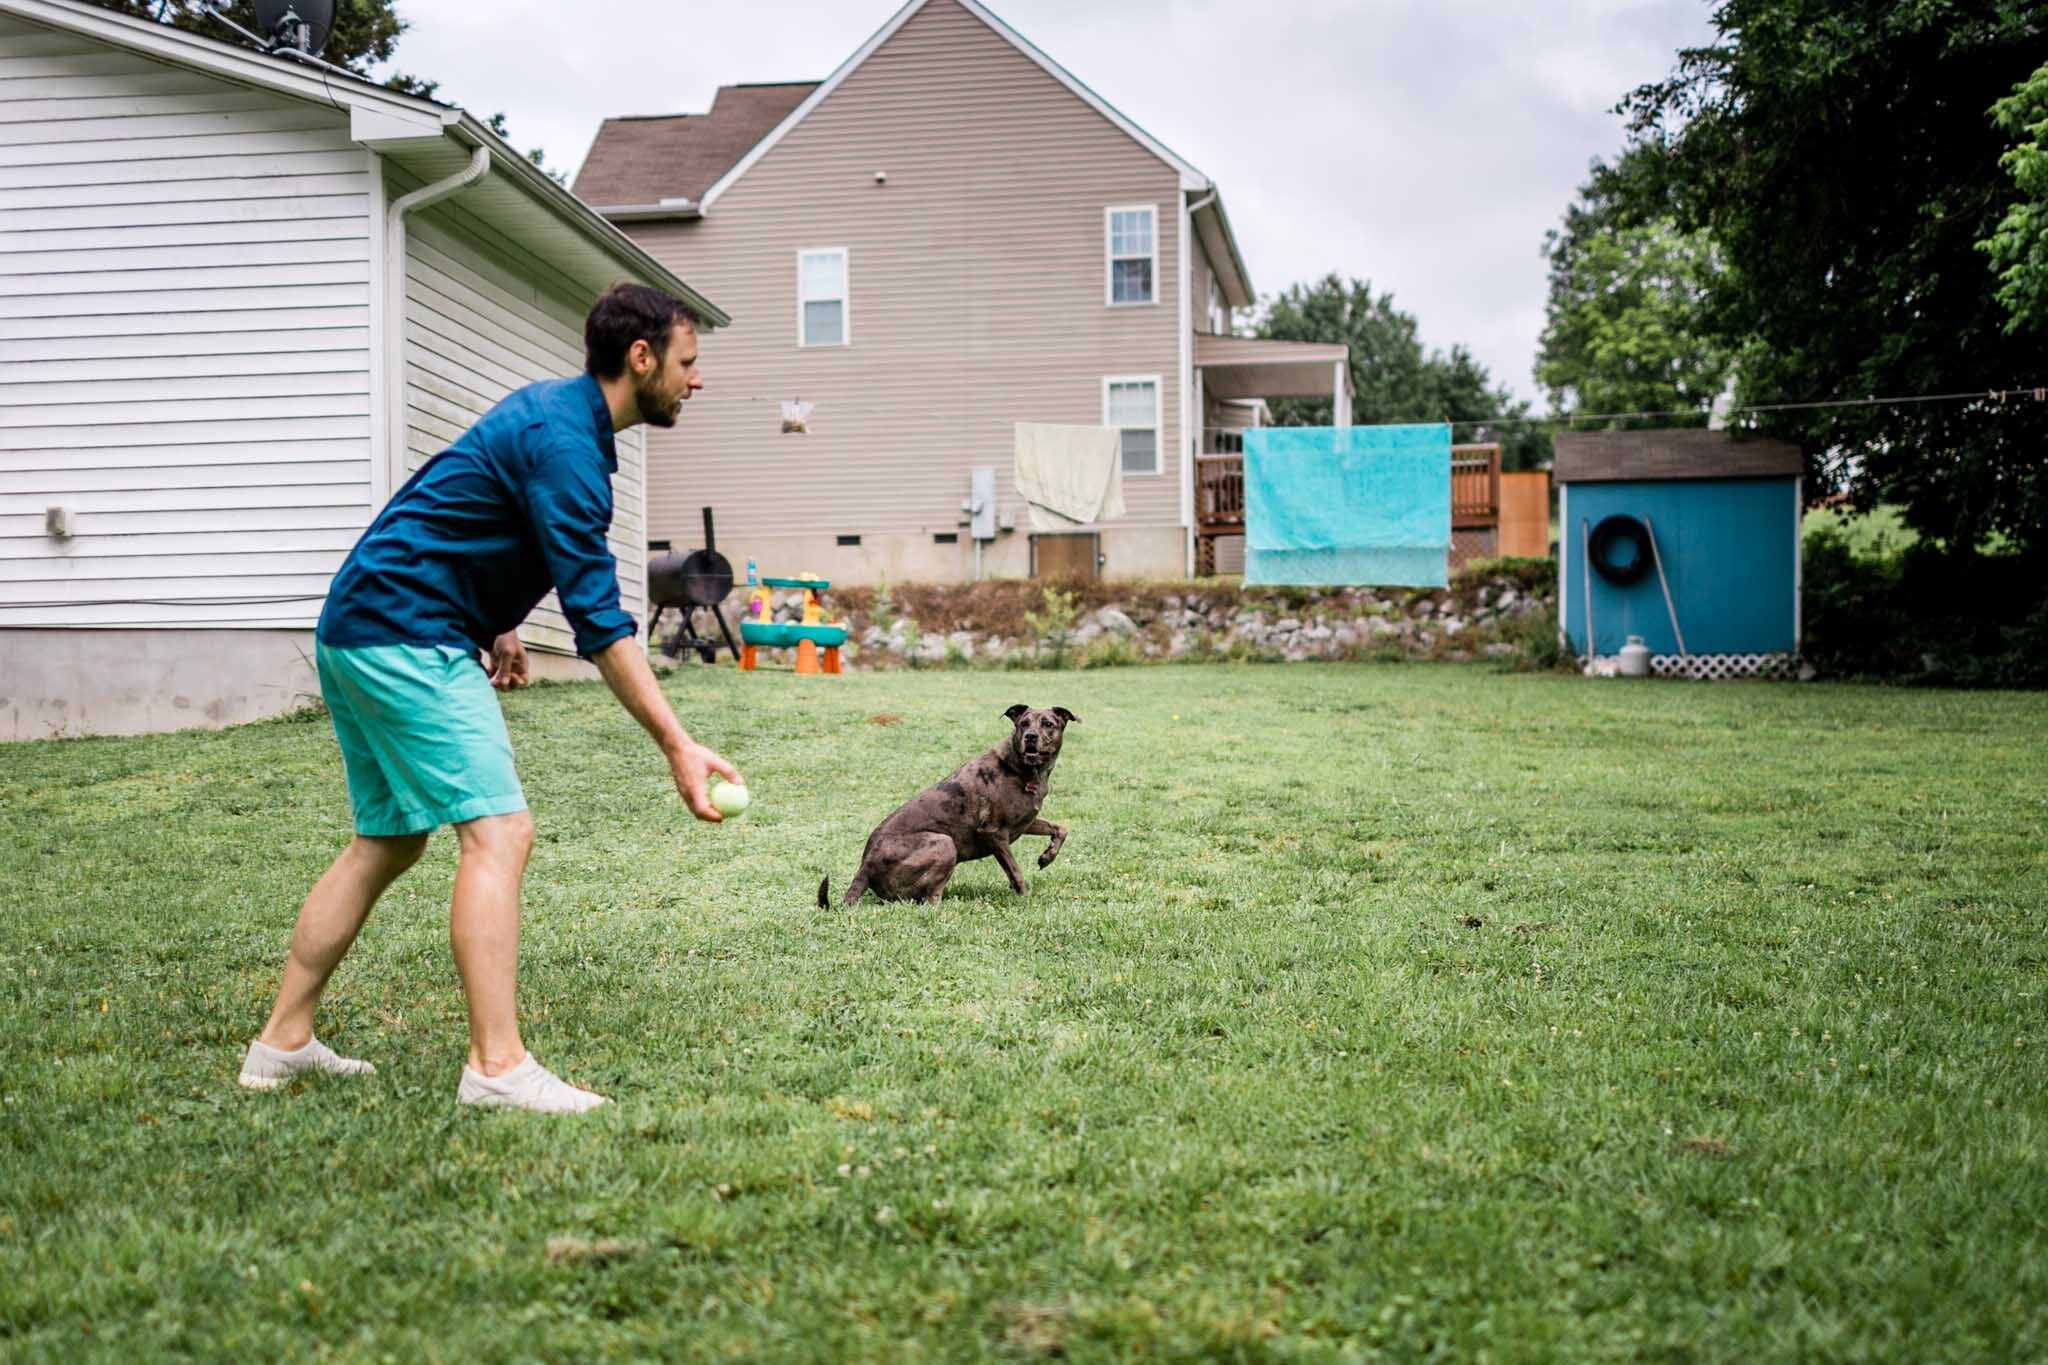 Raleigh Family Photographer | By G. Lin Photography | Man throwing ball towards dog